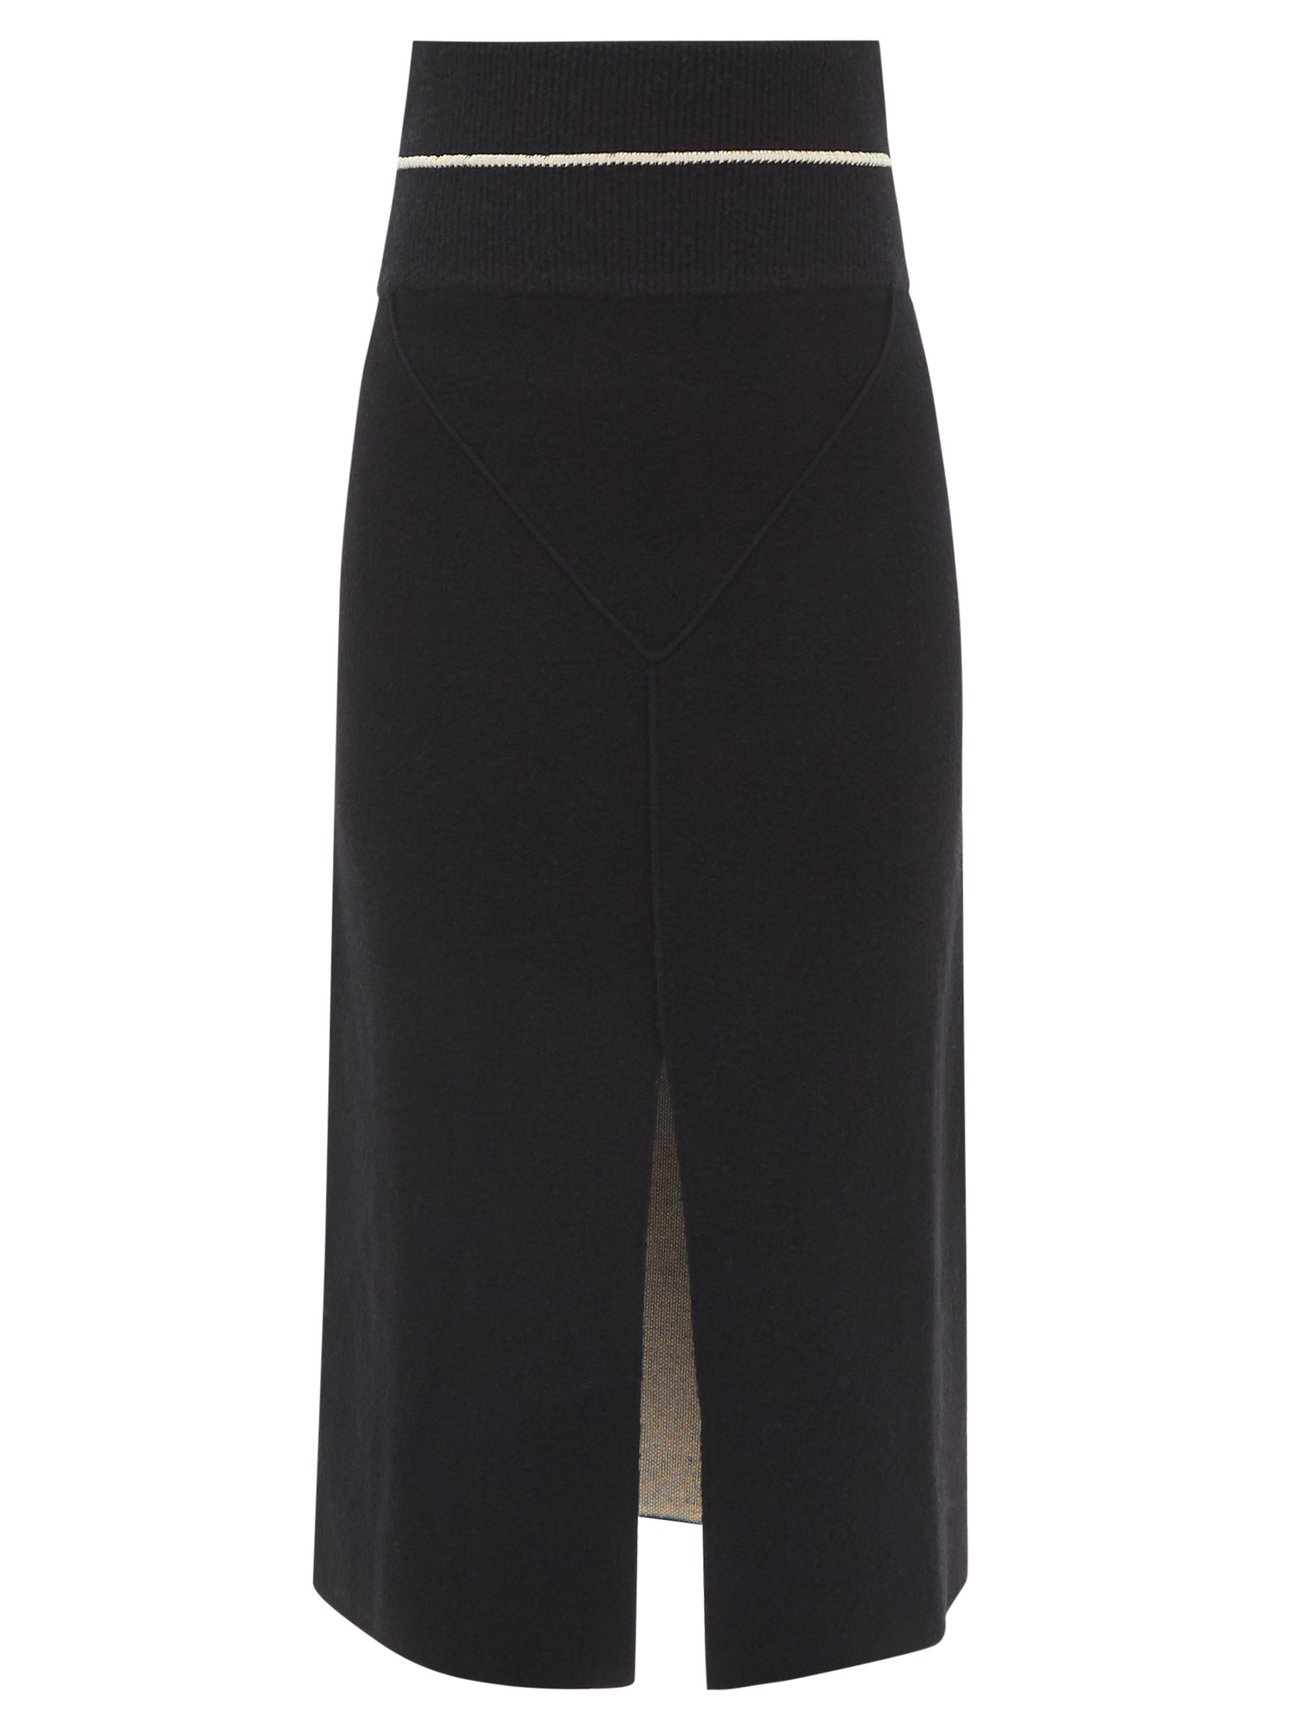 MISS N MAM New Ladies Womens Pull On Soft Jersey Culottes Standard & Plus Sizes 14-26 